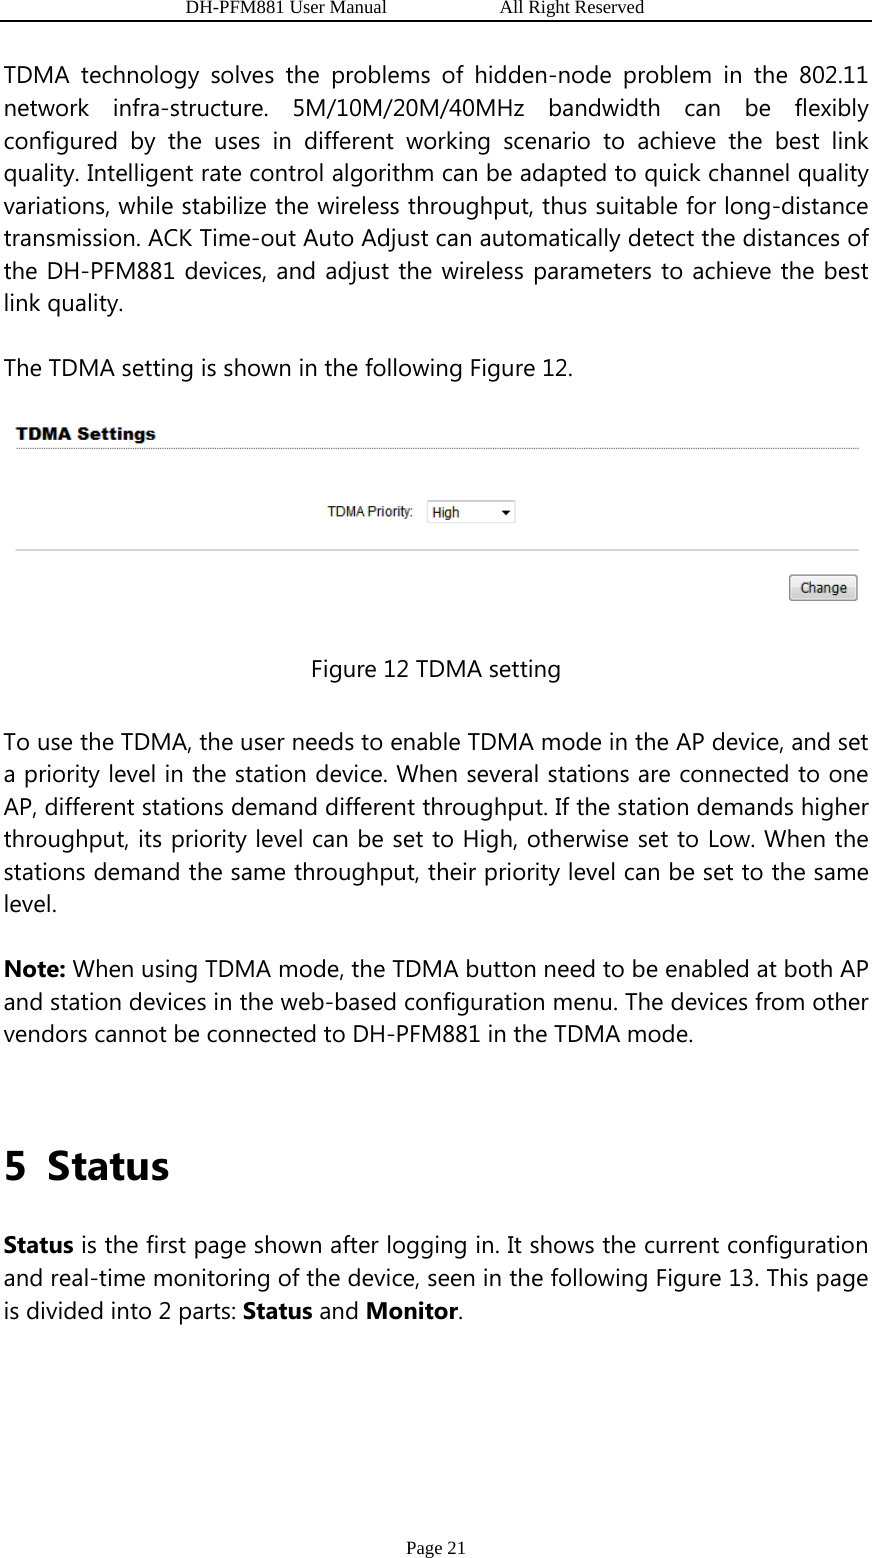                   DH-PFM881 User Manual            All Right Reserved Page 21 TDMA technology solves the problems of hidden-node problem in the 802.11 network infra-structure. 5M/10M/20M/40MHz bandwidth can be flexibly configured by the uses in different working scenario to achieve the best link quality. Intelligent rate control algorithm can be adapted to quick channel quality variations, while stabilize the wireless throughput, thus suitable for long-distance transmission. ACK Time-out Auto Adjust can automatically detect the distances of the DH-PFM881 devices, and adjust the wireless parameters to achieve the best link quality. The TDMA setting is shown in the following Figure 12.  Figure 12 TDMA setting To use the TDMA, the user needs to enable TDMA mode in the AP device, and set a priority level in the station device. When several stations are connected to one AP, different stations demand different throughput. If the station demands higher throughput, its priority level can be set to High, otherwise set to Low. When the stations demand the same throughput, their priority level can be set to the same level. Note: When using TDMA mode, the TDMA button need to be enabled at both AP and station devices in the web-based configuration menu. The devices from other vendors cannot be connected to DH-PFM881 in the TDMA mode.  5 Status Status is the first page shown after logging in. It shows the current configuration and real-time monitoring of the device, seen in the following Figure 13. This page is divided into 2 parts: Status and Monitor. 